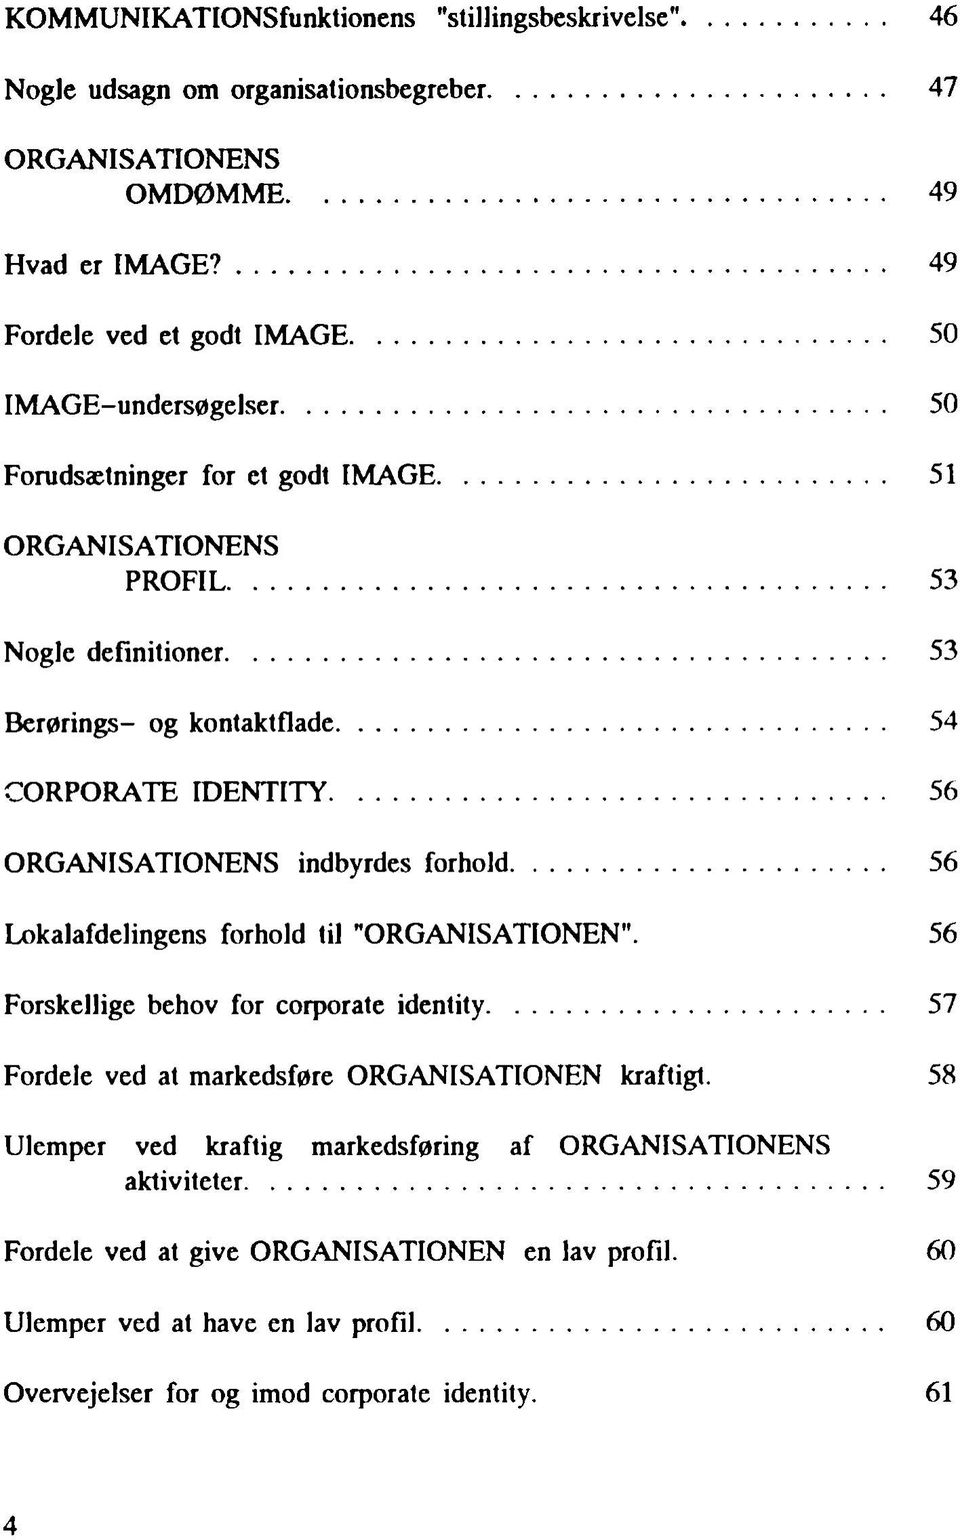 .. 56 ORGANISATIONENS indbyrdes forhold... 56 Lokalafdelingens forhold til "ORGANISATIONEN". 56 Forskellige behov for corporate identity.